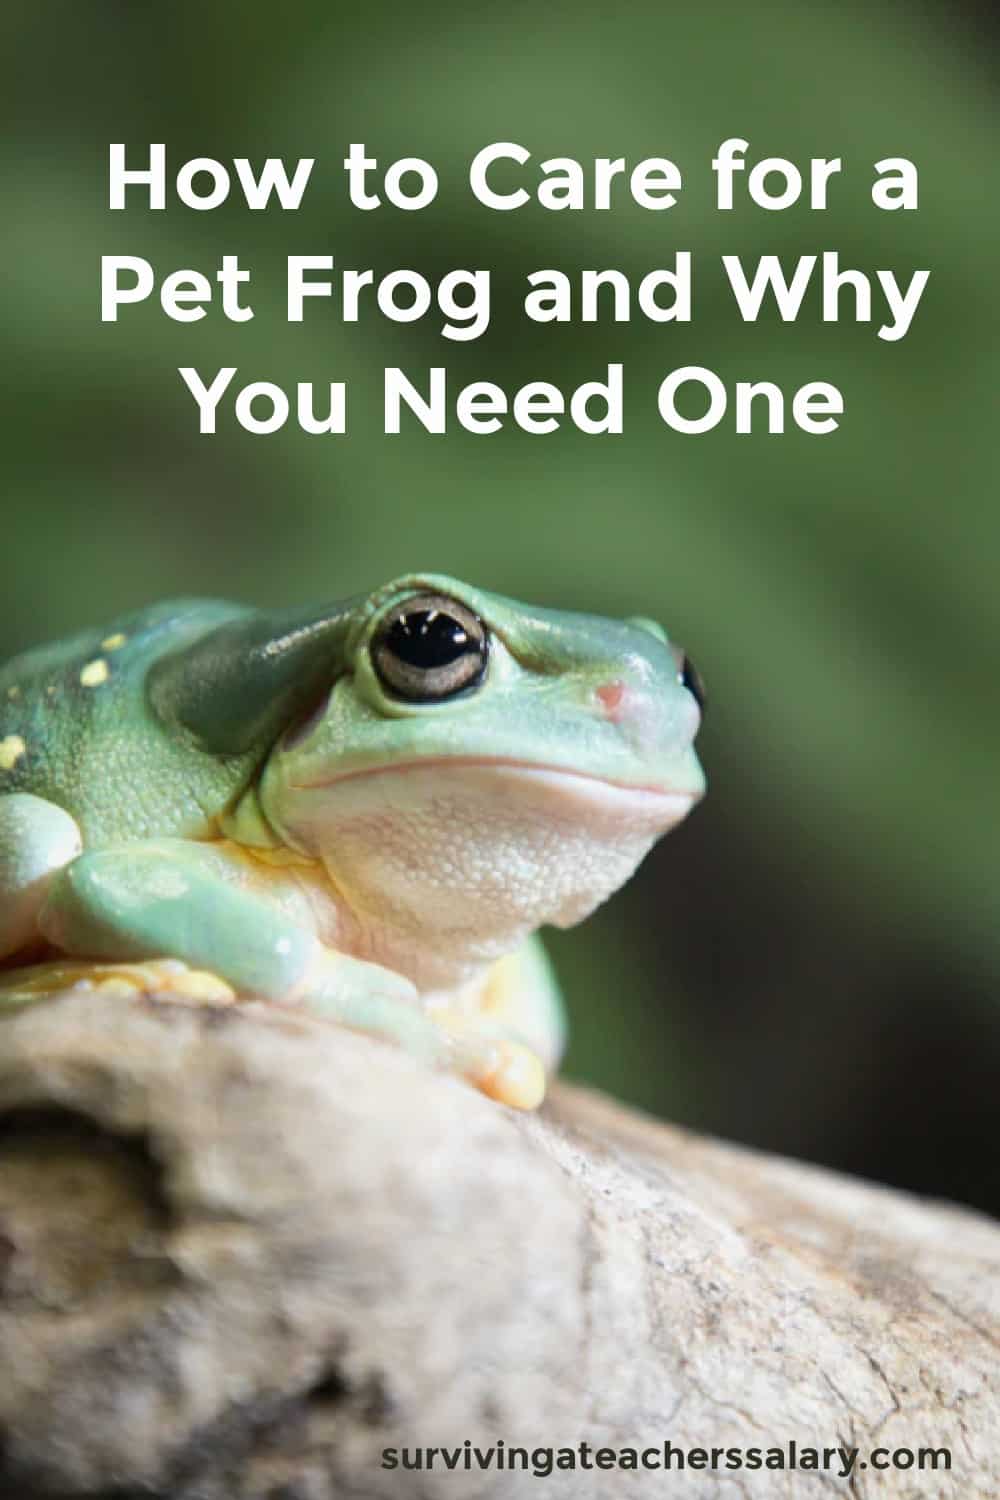 How to Care for a Pet Frog and Why You Need One